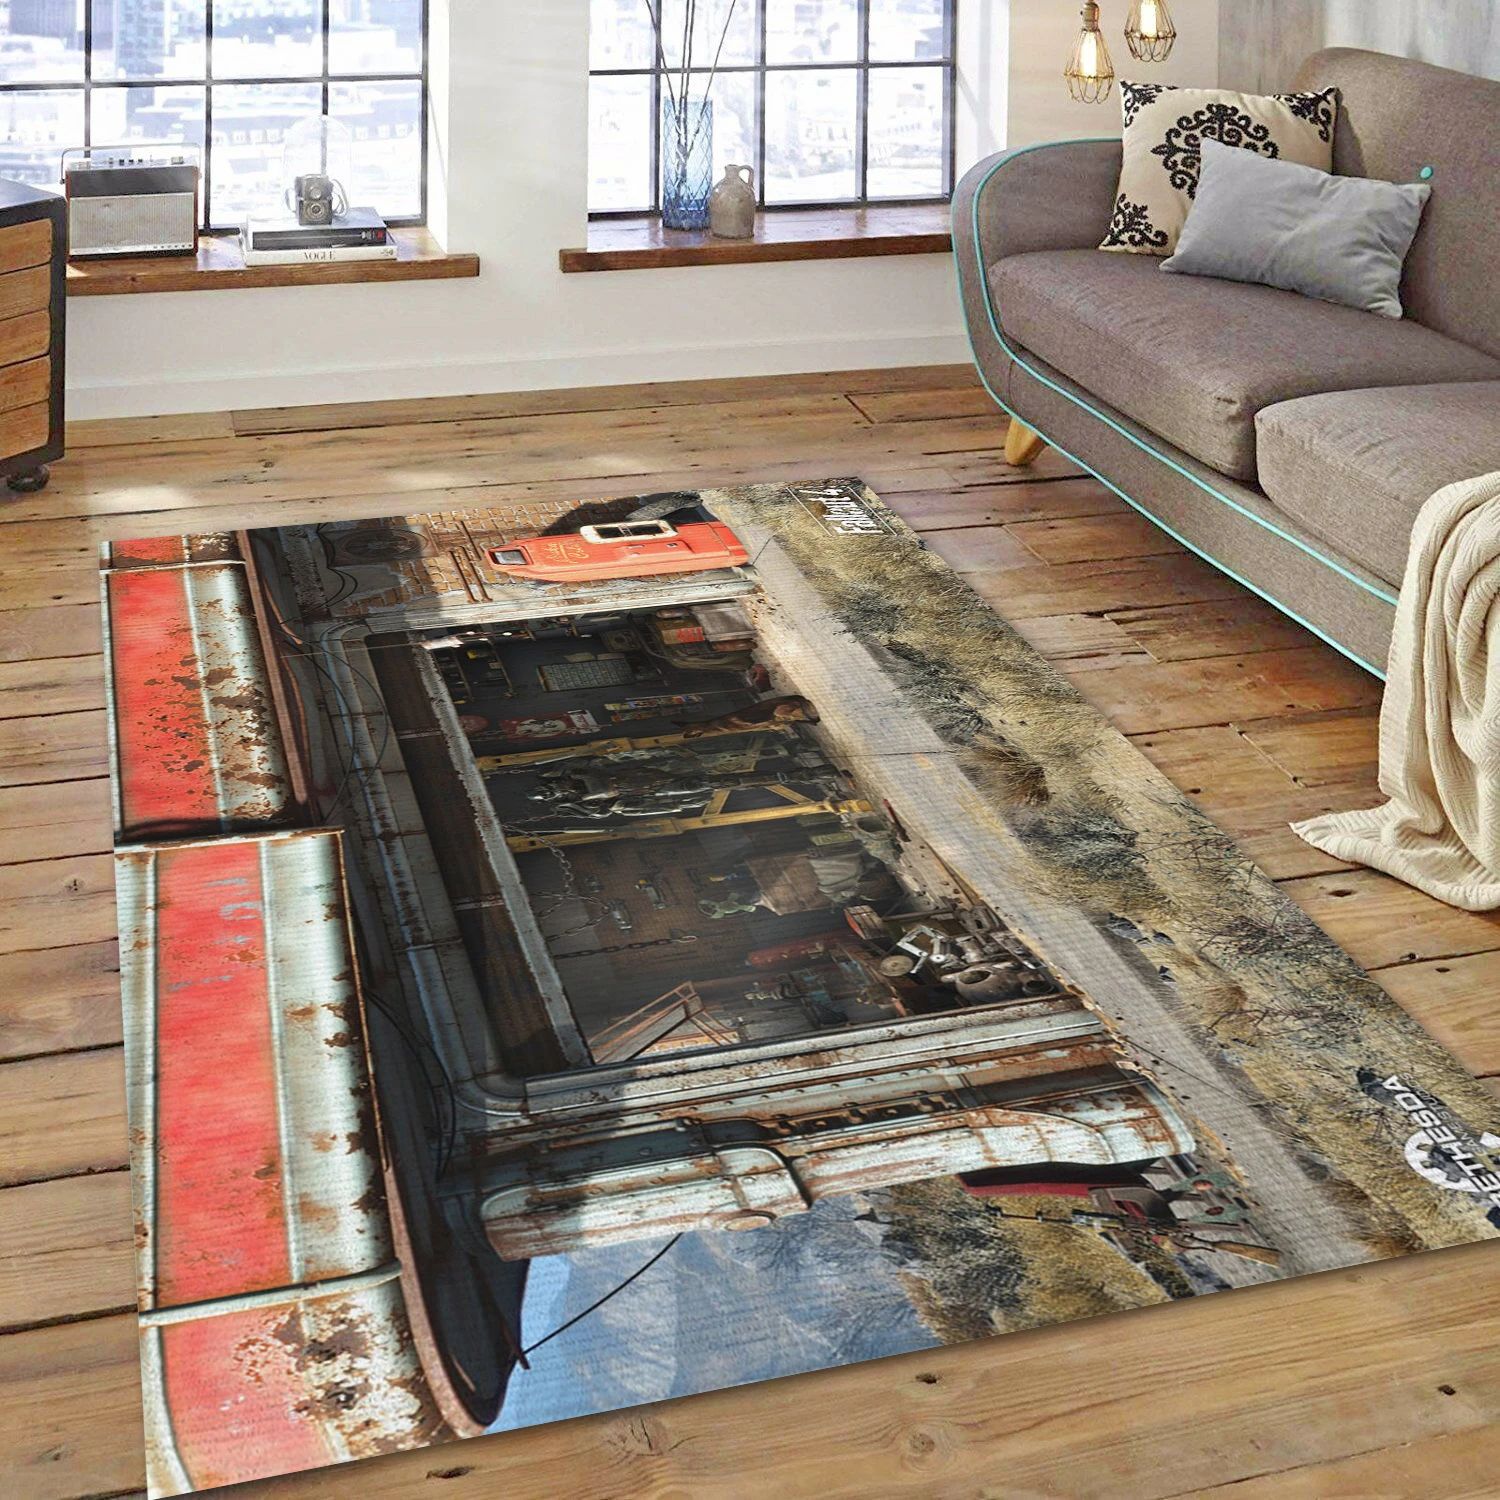 Fallout 4 Gaming Area Rug, Bedroom Rug - Christmas Gift Decor - Indoor Outdoor Rugs